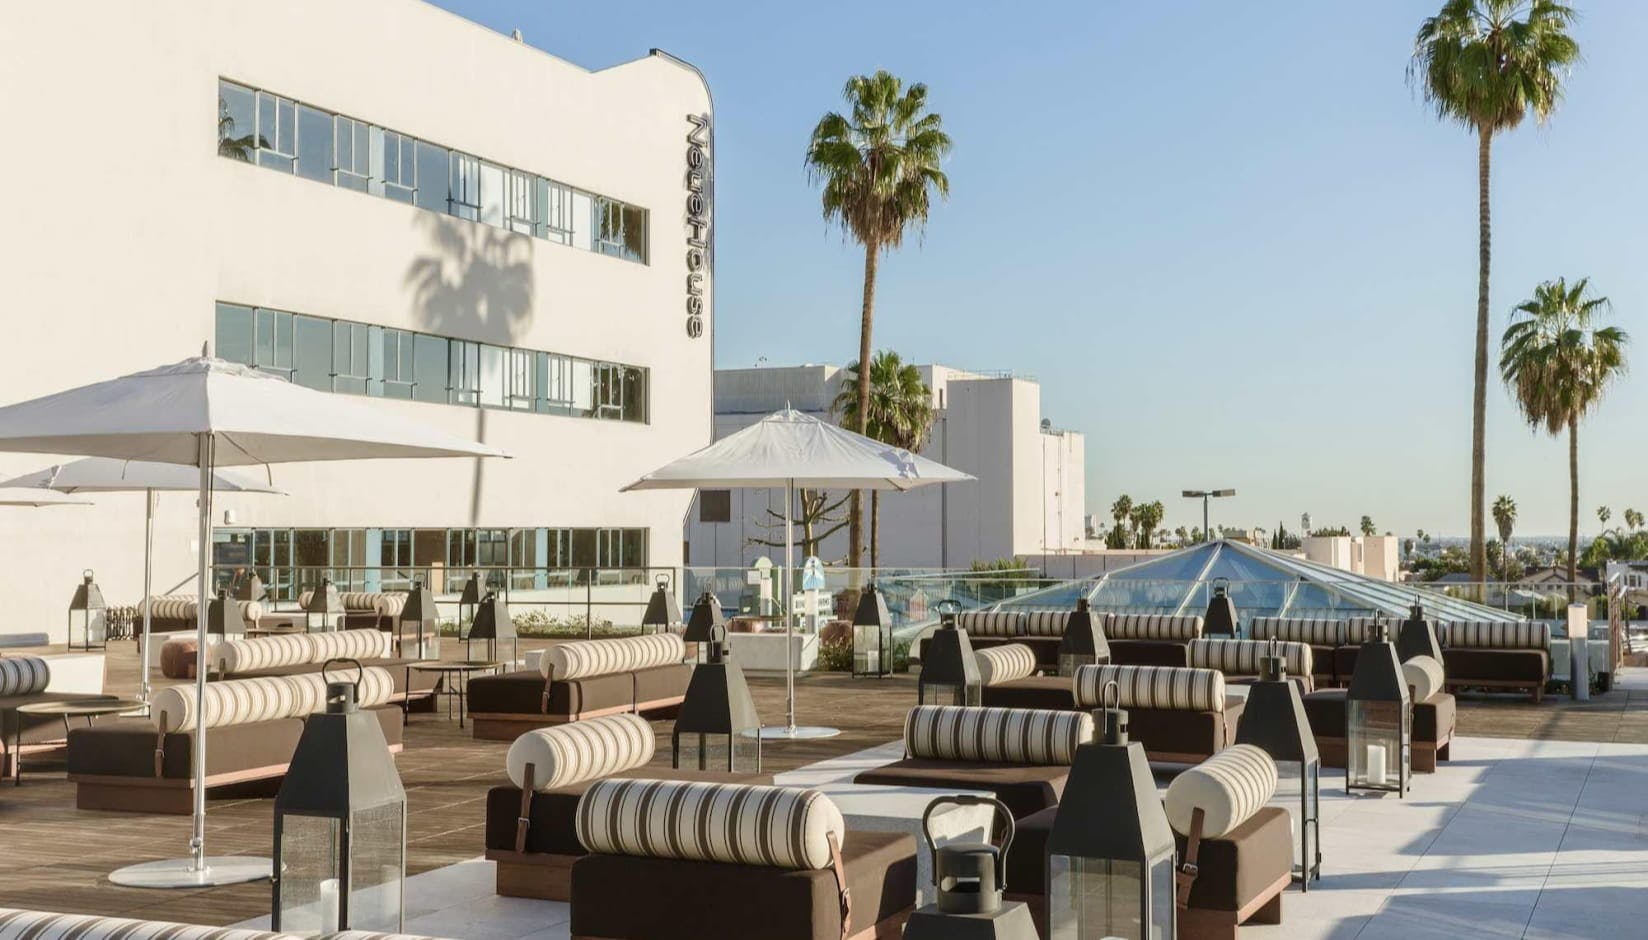 NeueHouse Hollywood - terrace of the flexible workspace